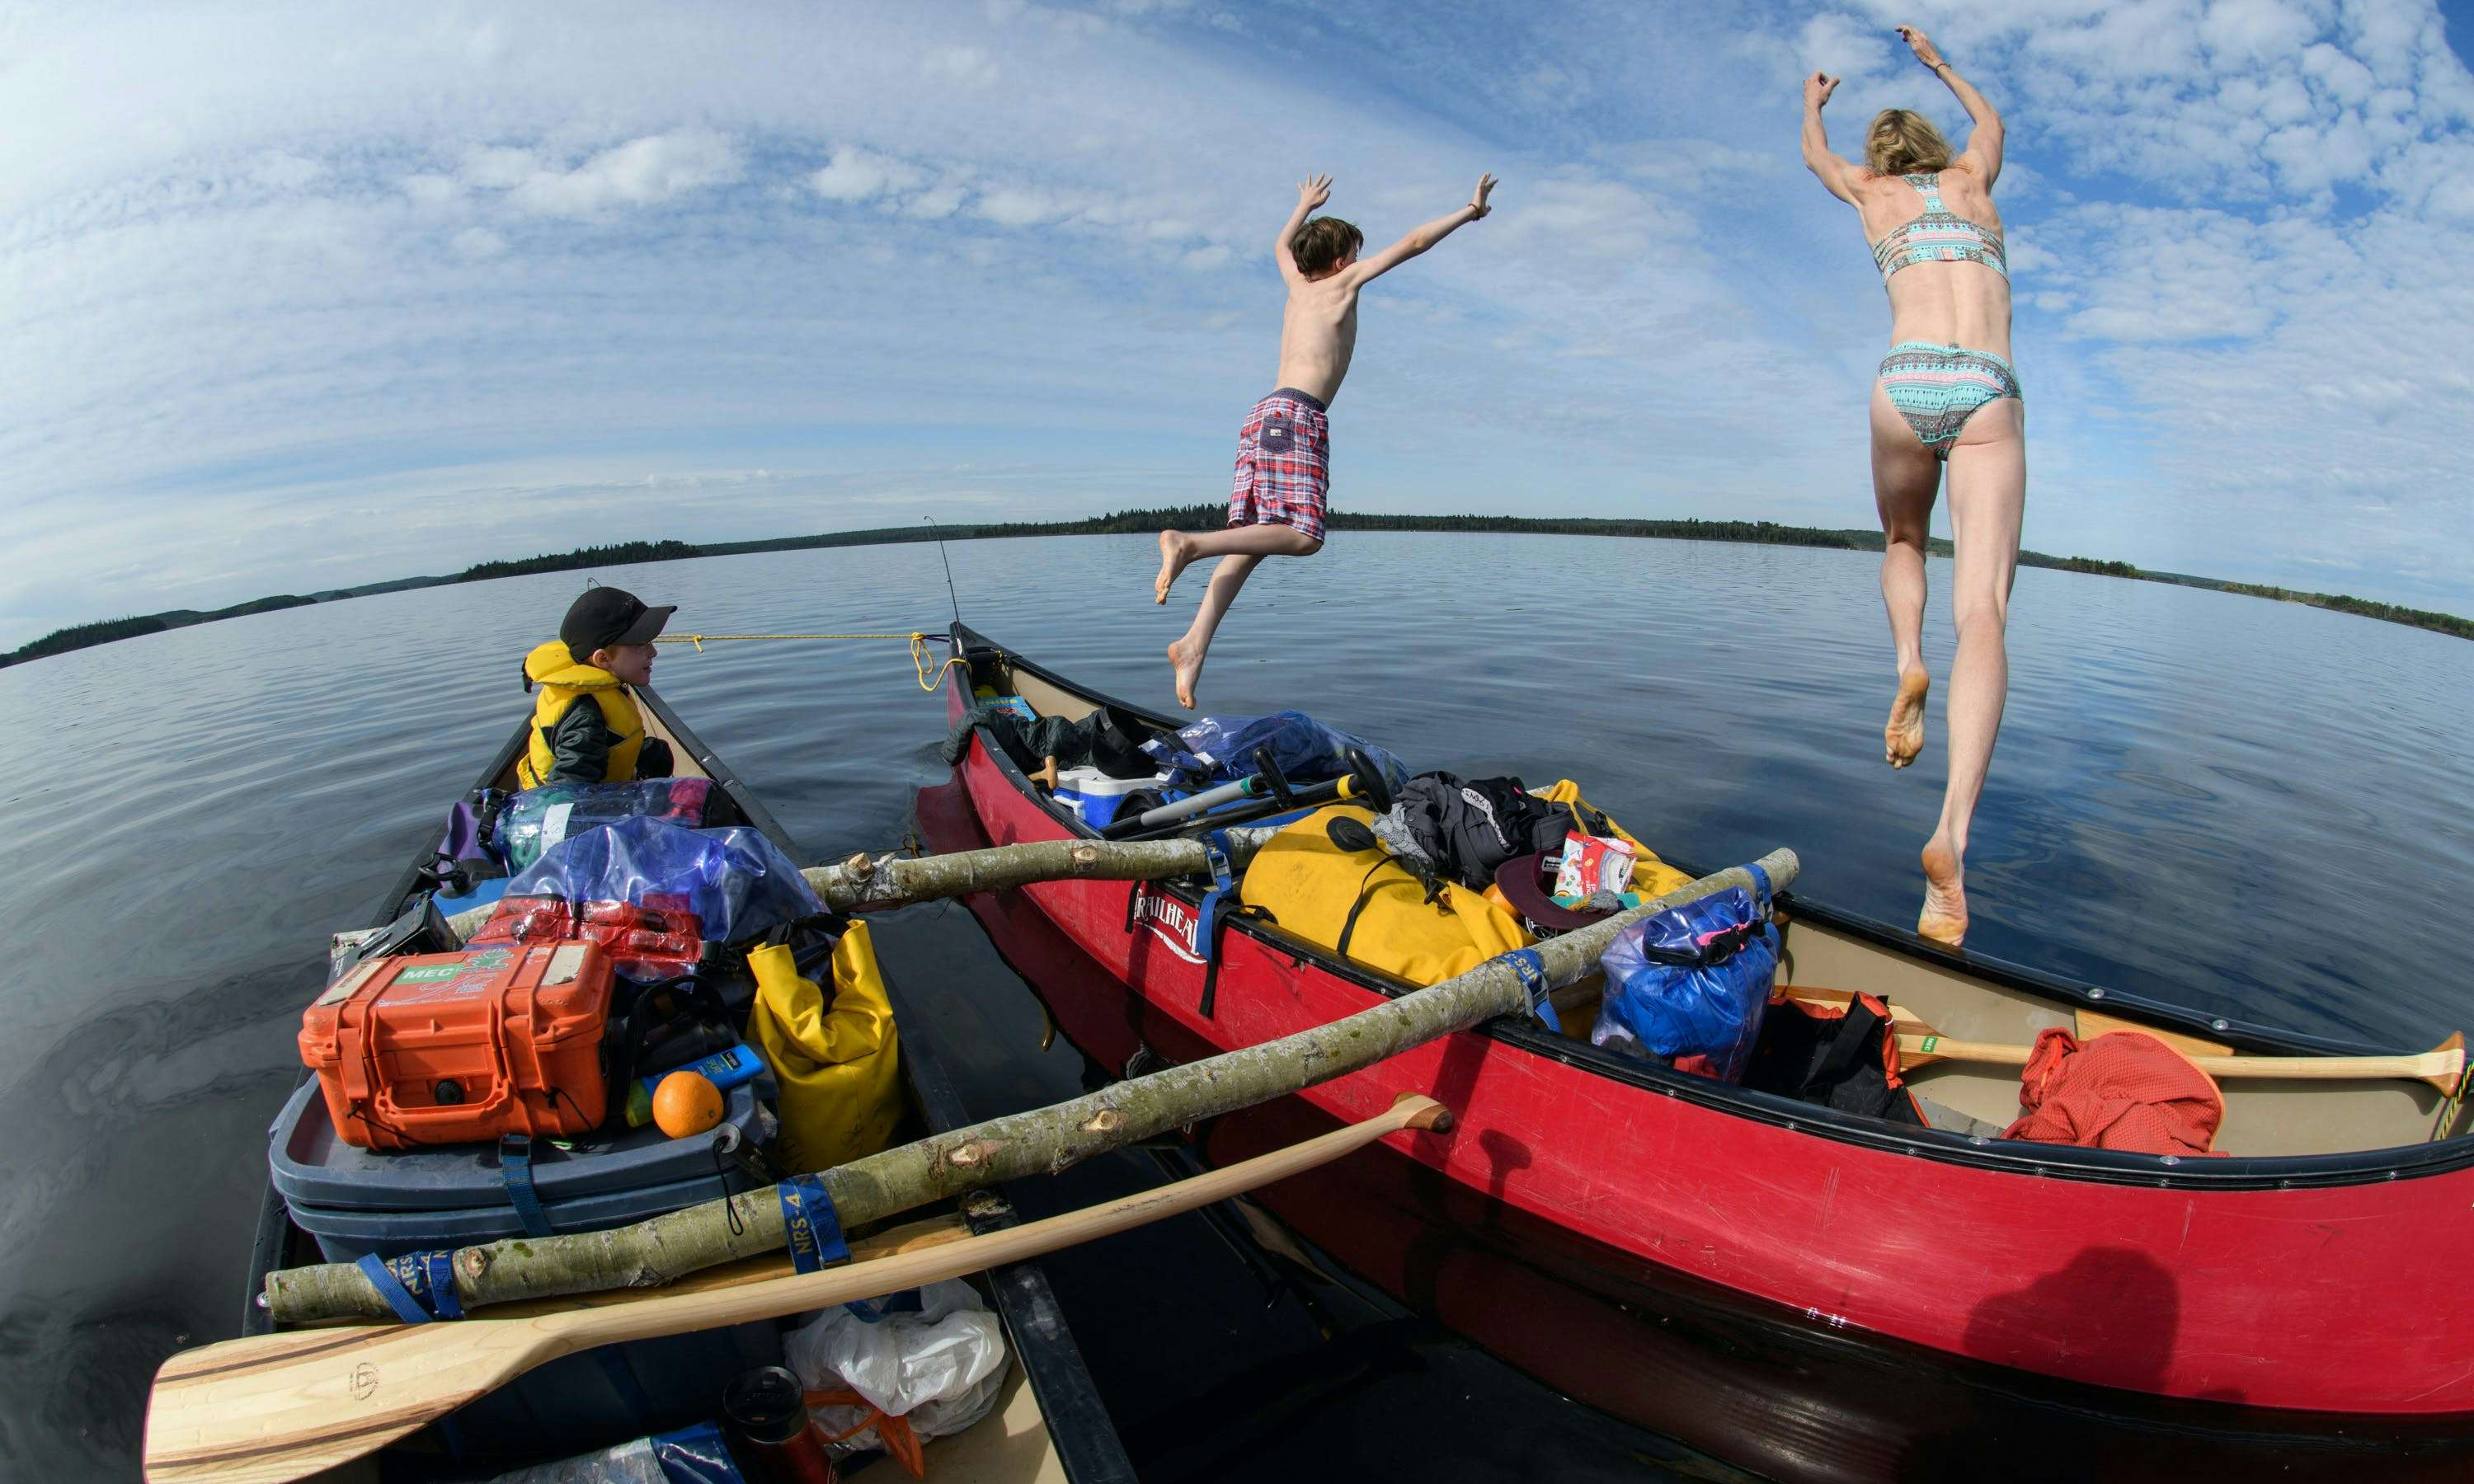 A woman and a boy leap out of their canoe into the water as another boy watches from a second canoe.